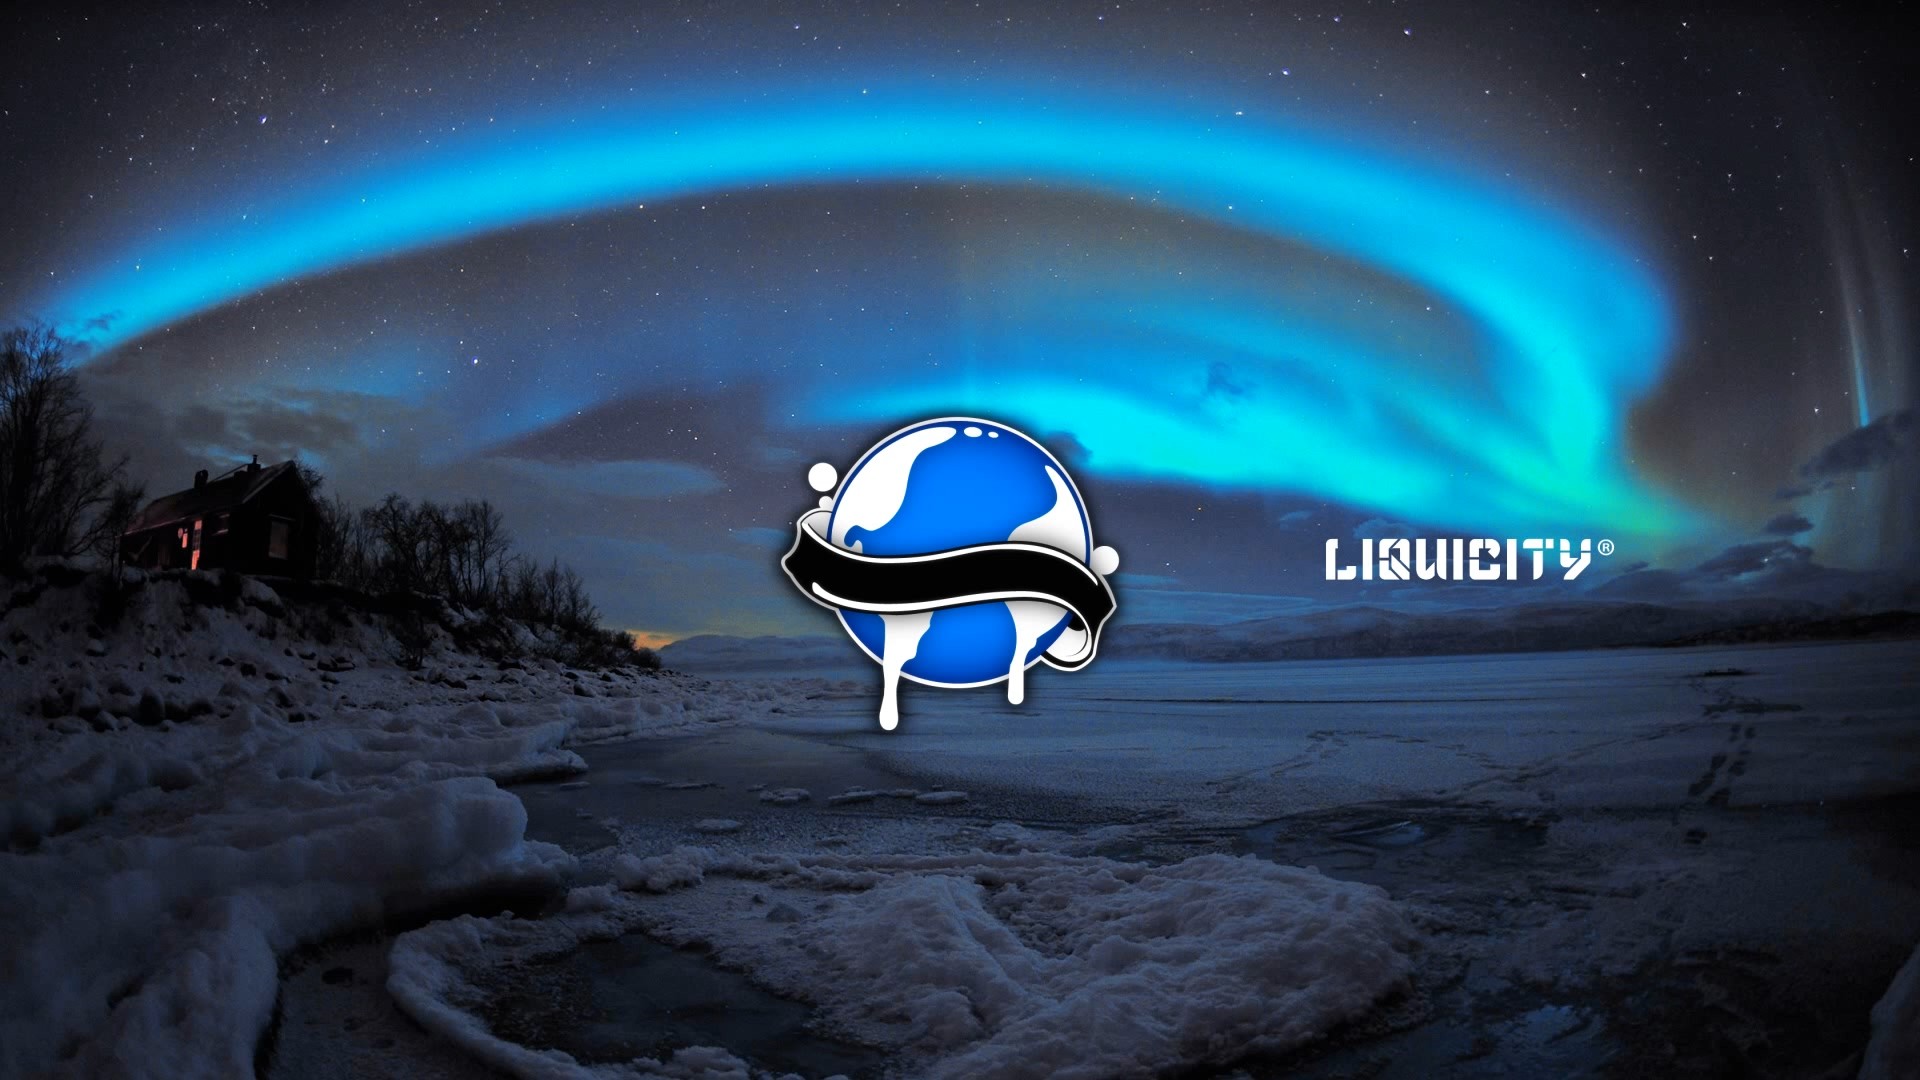 Liquicity Wallpapers Hd Desktop And Mobile Backgrounds Images, Photos, Reviews